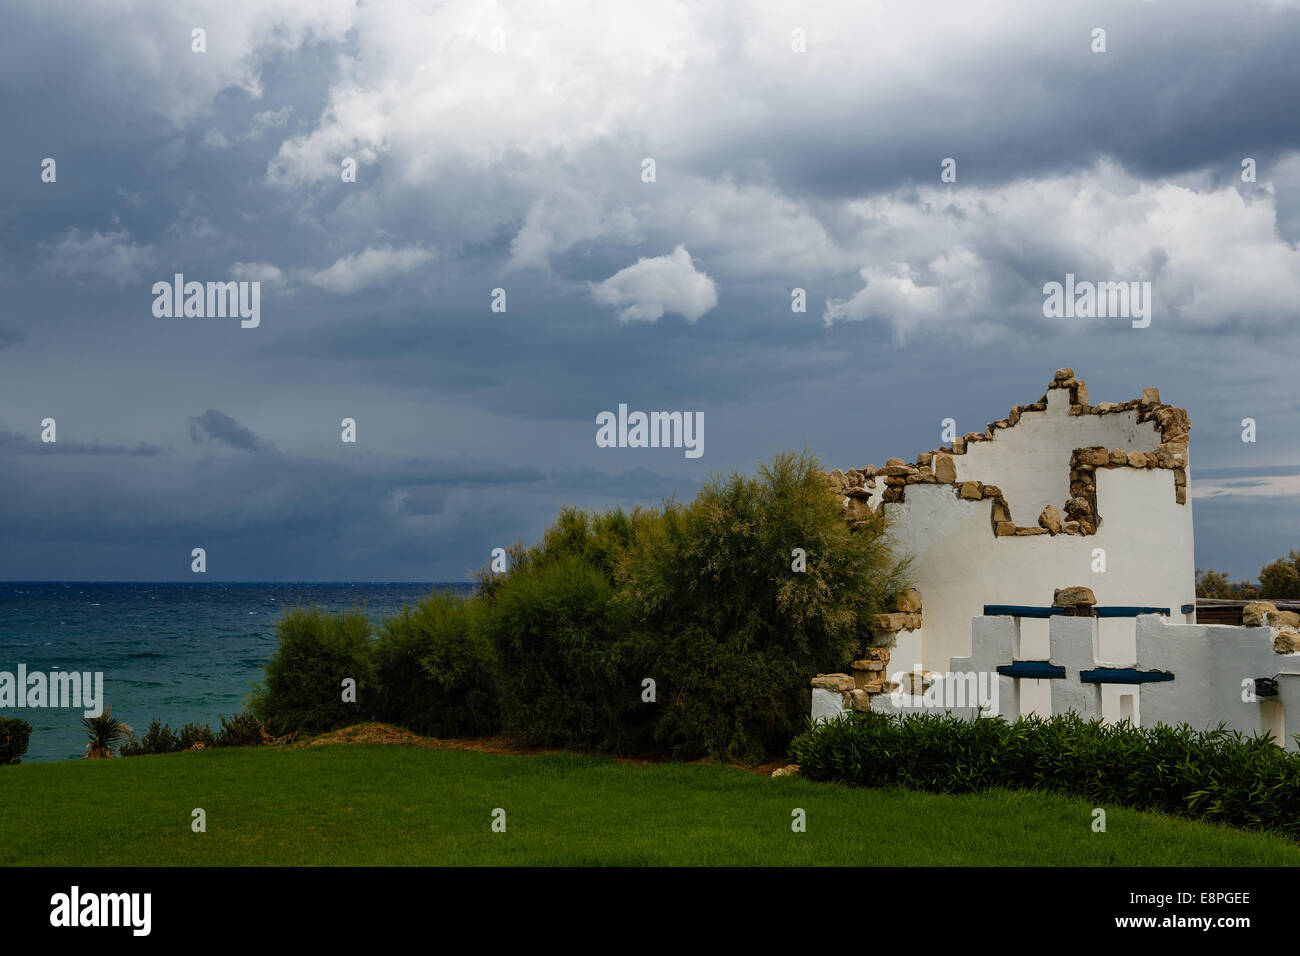 Thunderclouds in the sky over hotel by the sea in Greece Stock Photo